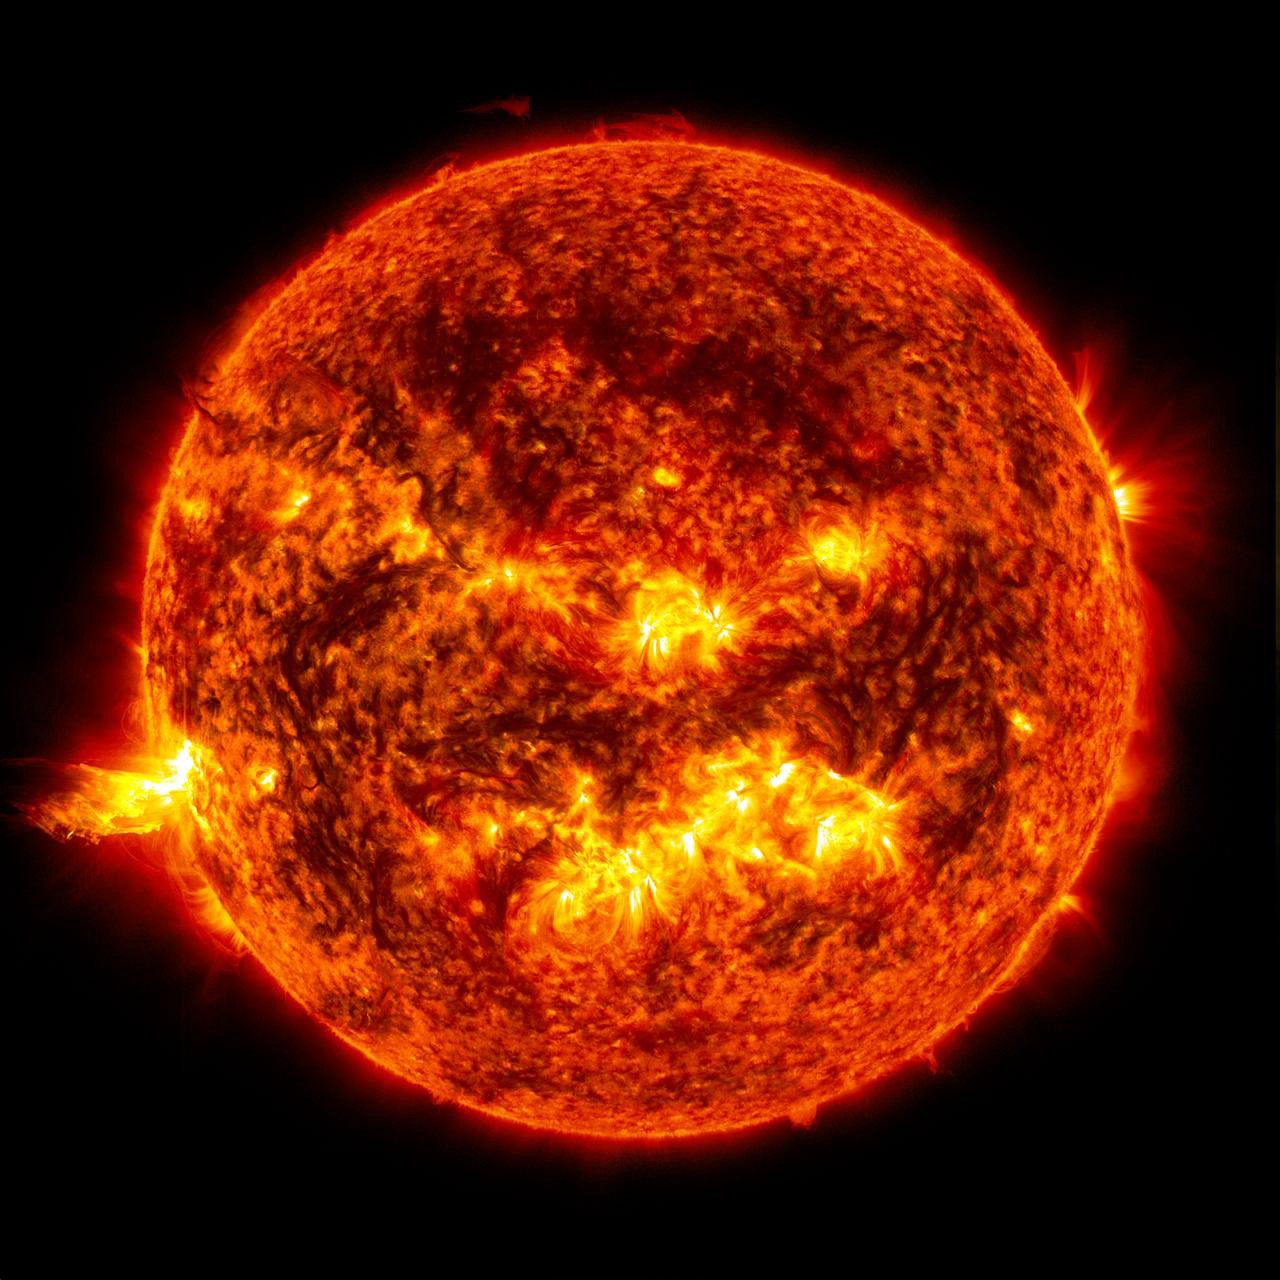 Our-Sun-is-a-main-sequence-star